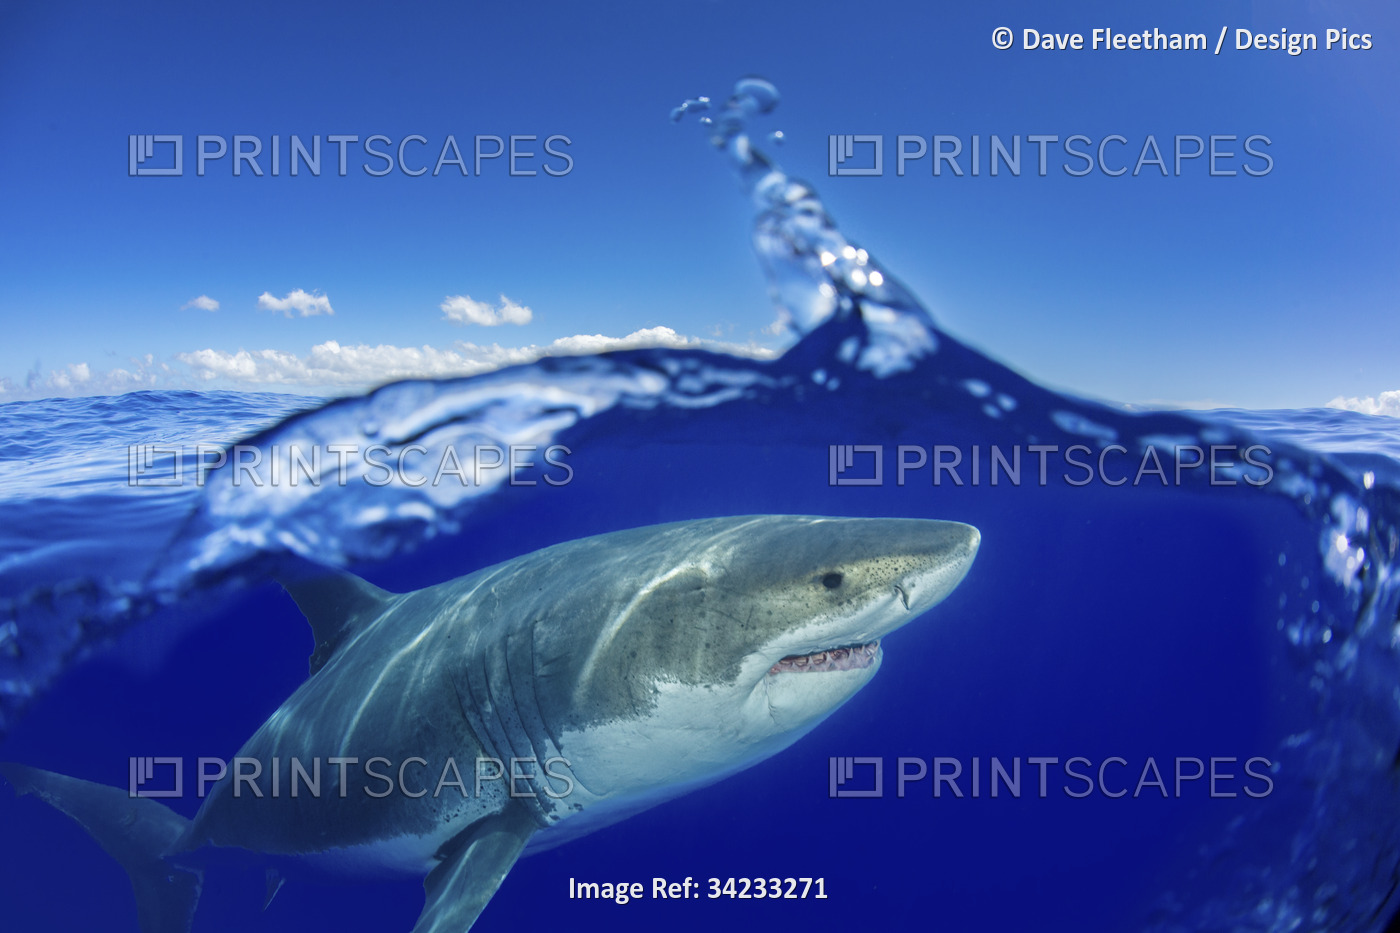 This Great white shark (Carcharodon carcharias) was photographed off Guadalupe ...